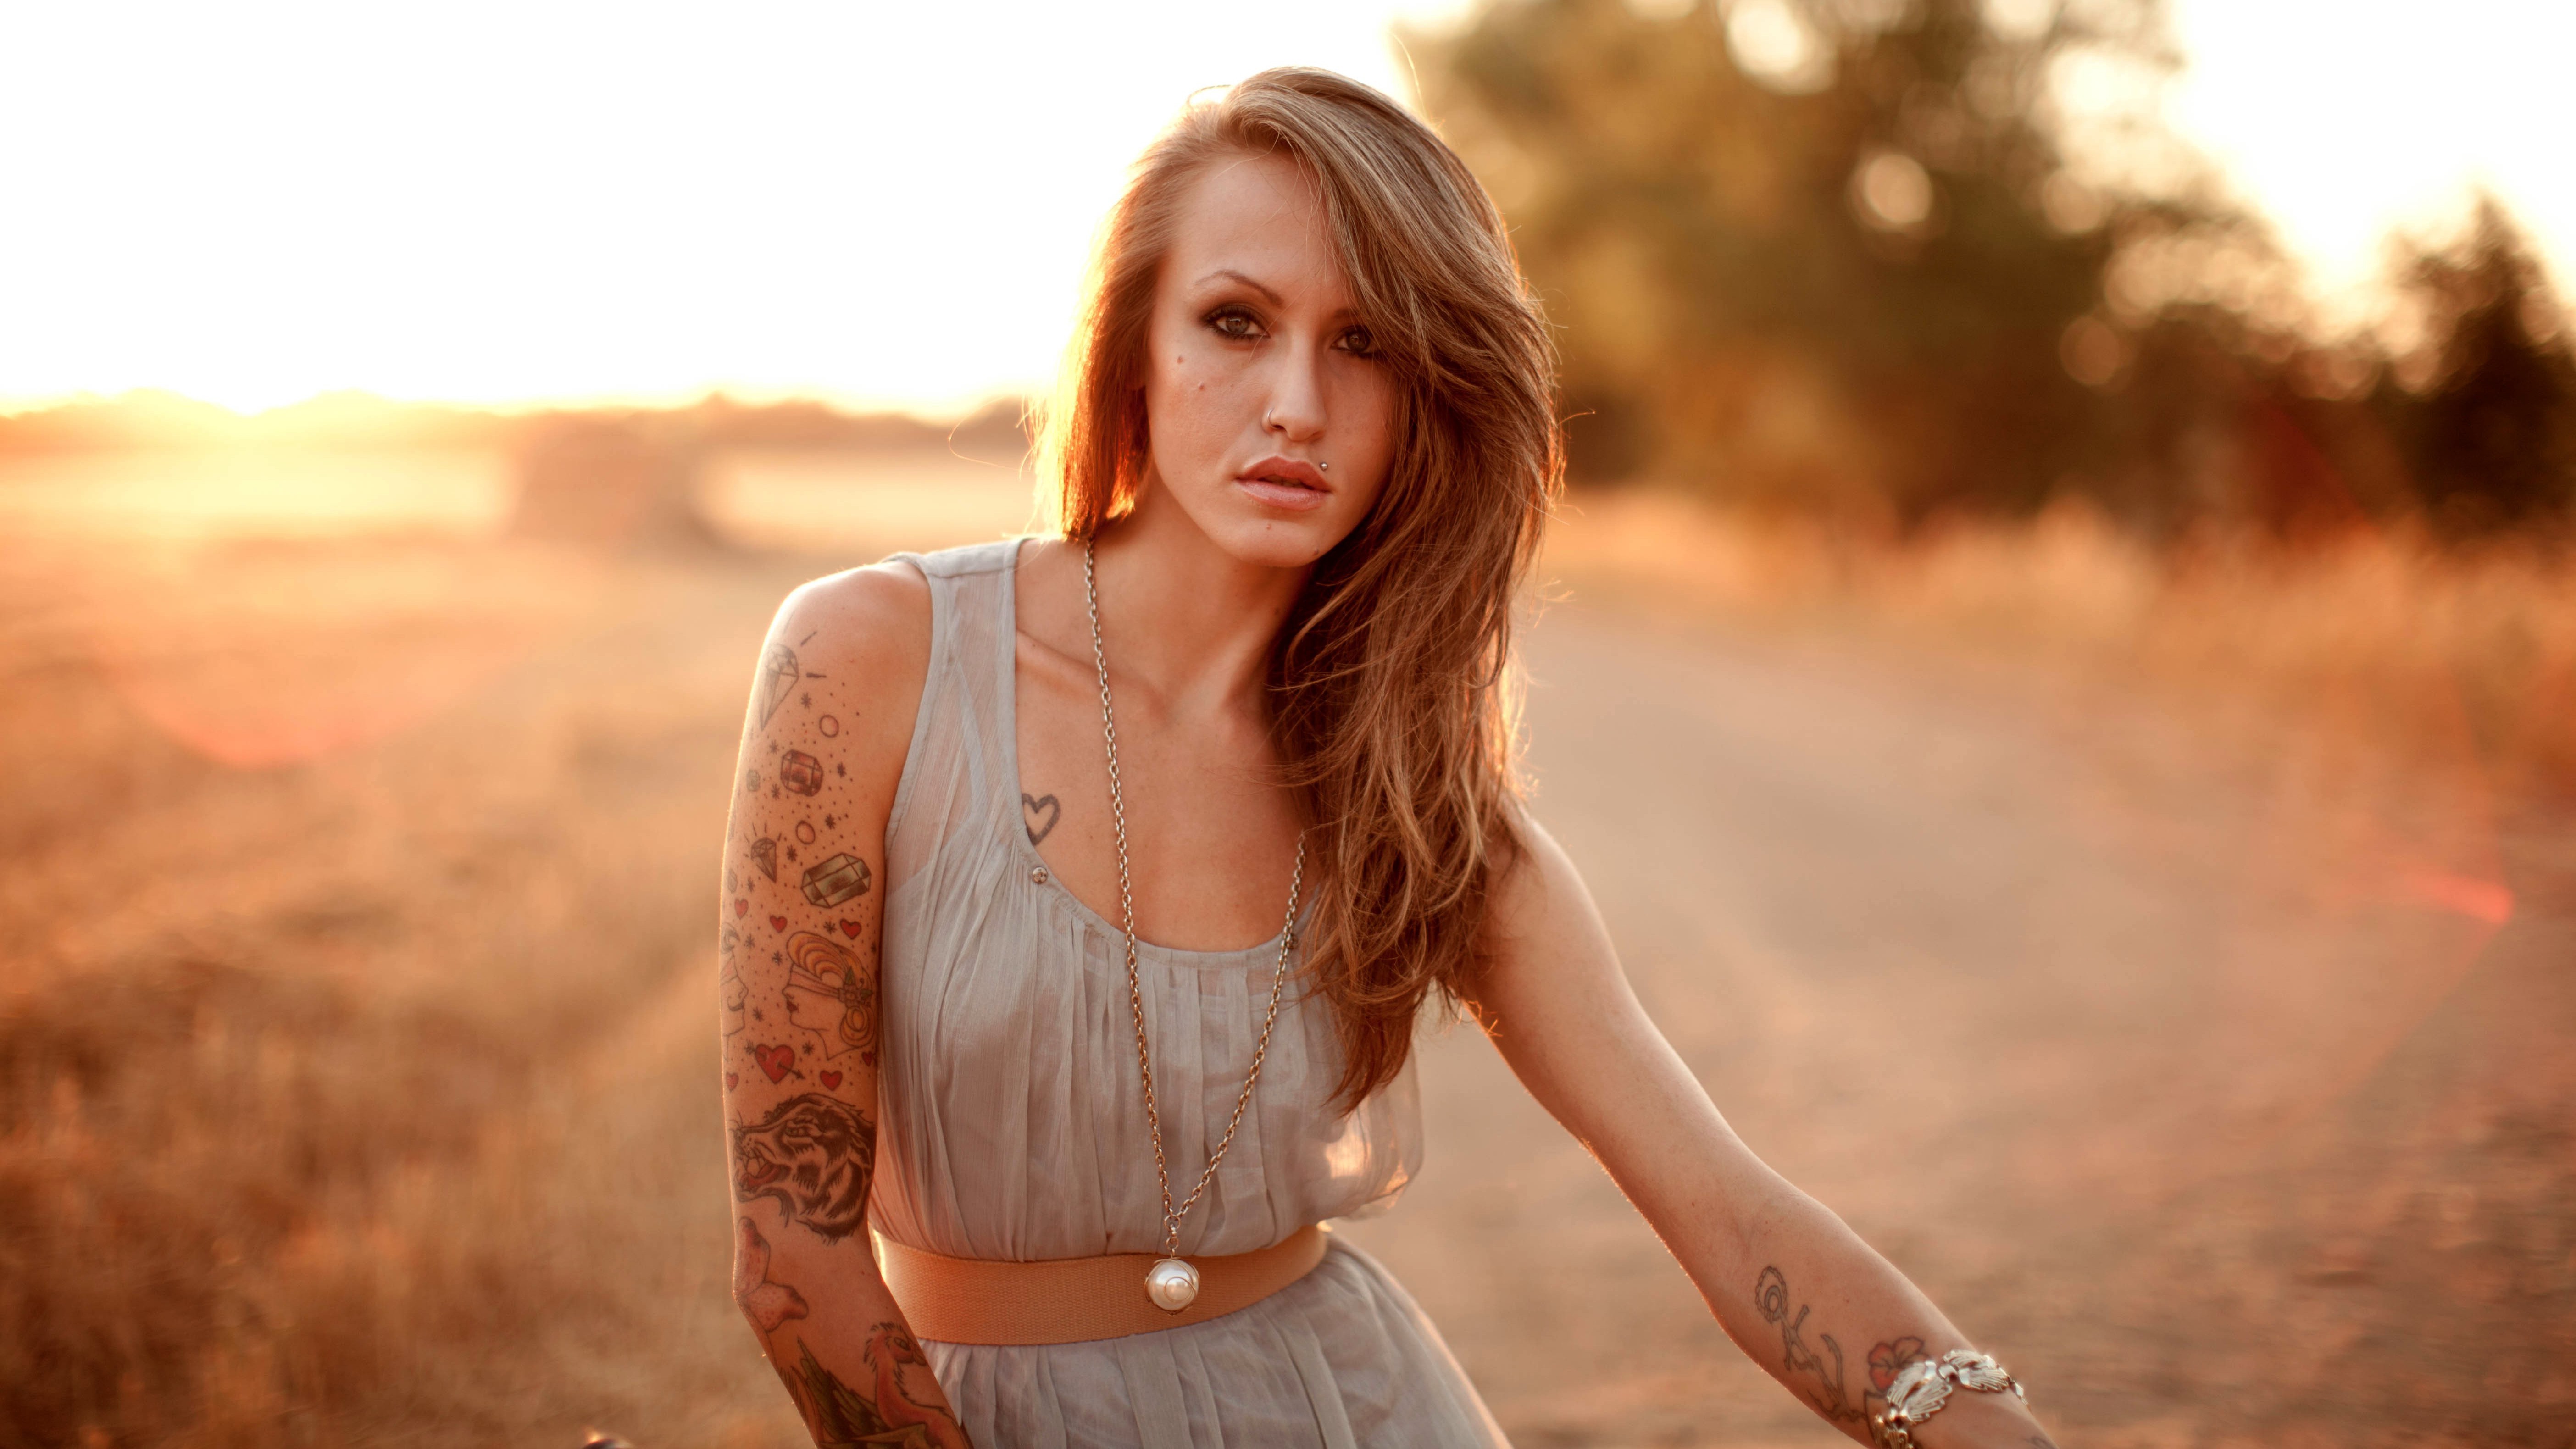 Free photo A girl with tattoos on her arms against the background of the sunset